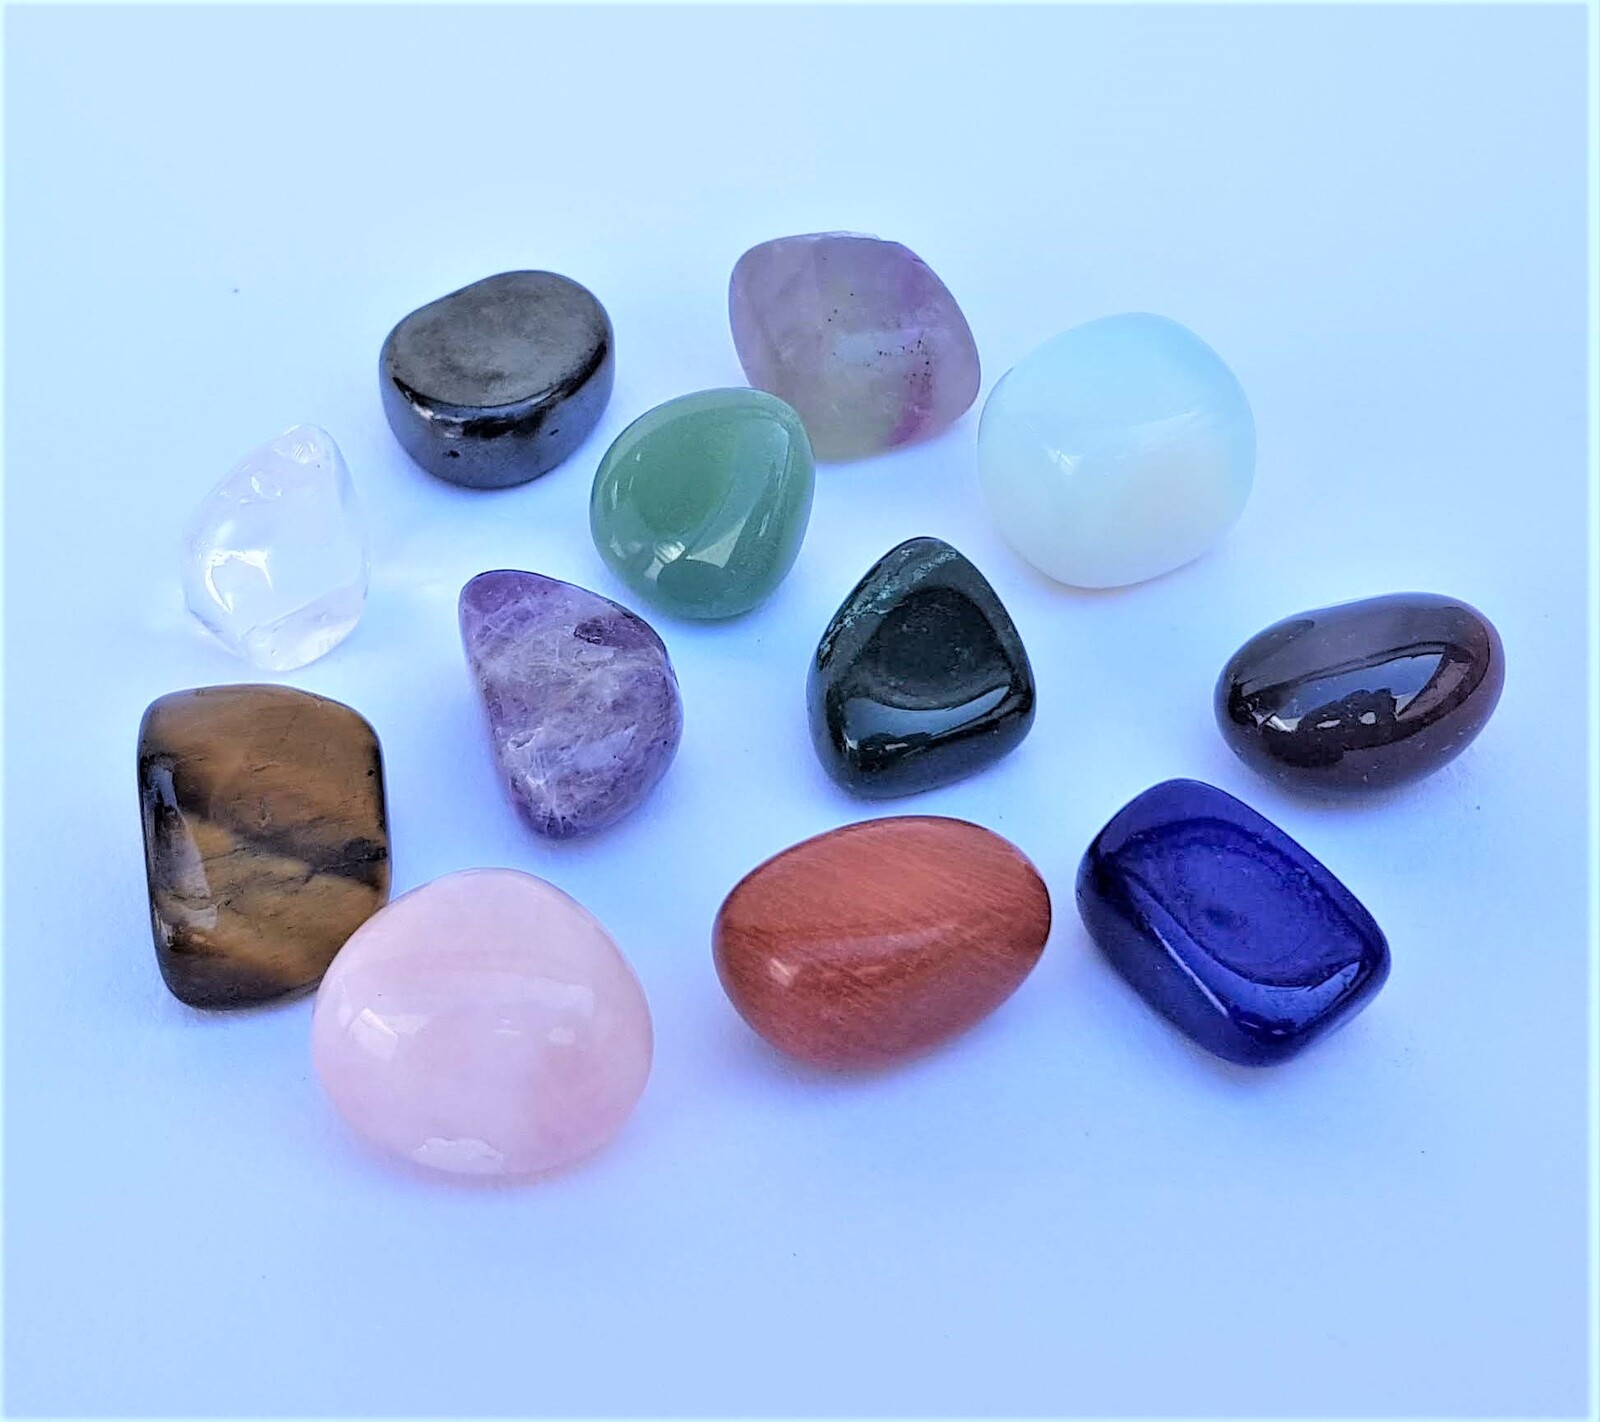 New 1pce 2-3cm Tumbled Gem Stones 12 Assorted Crystals To Choose Healing 